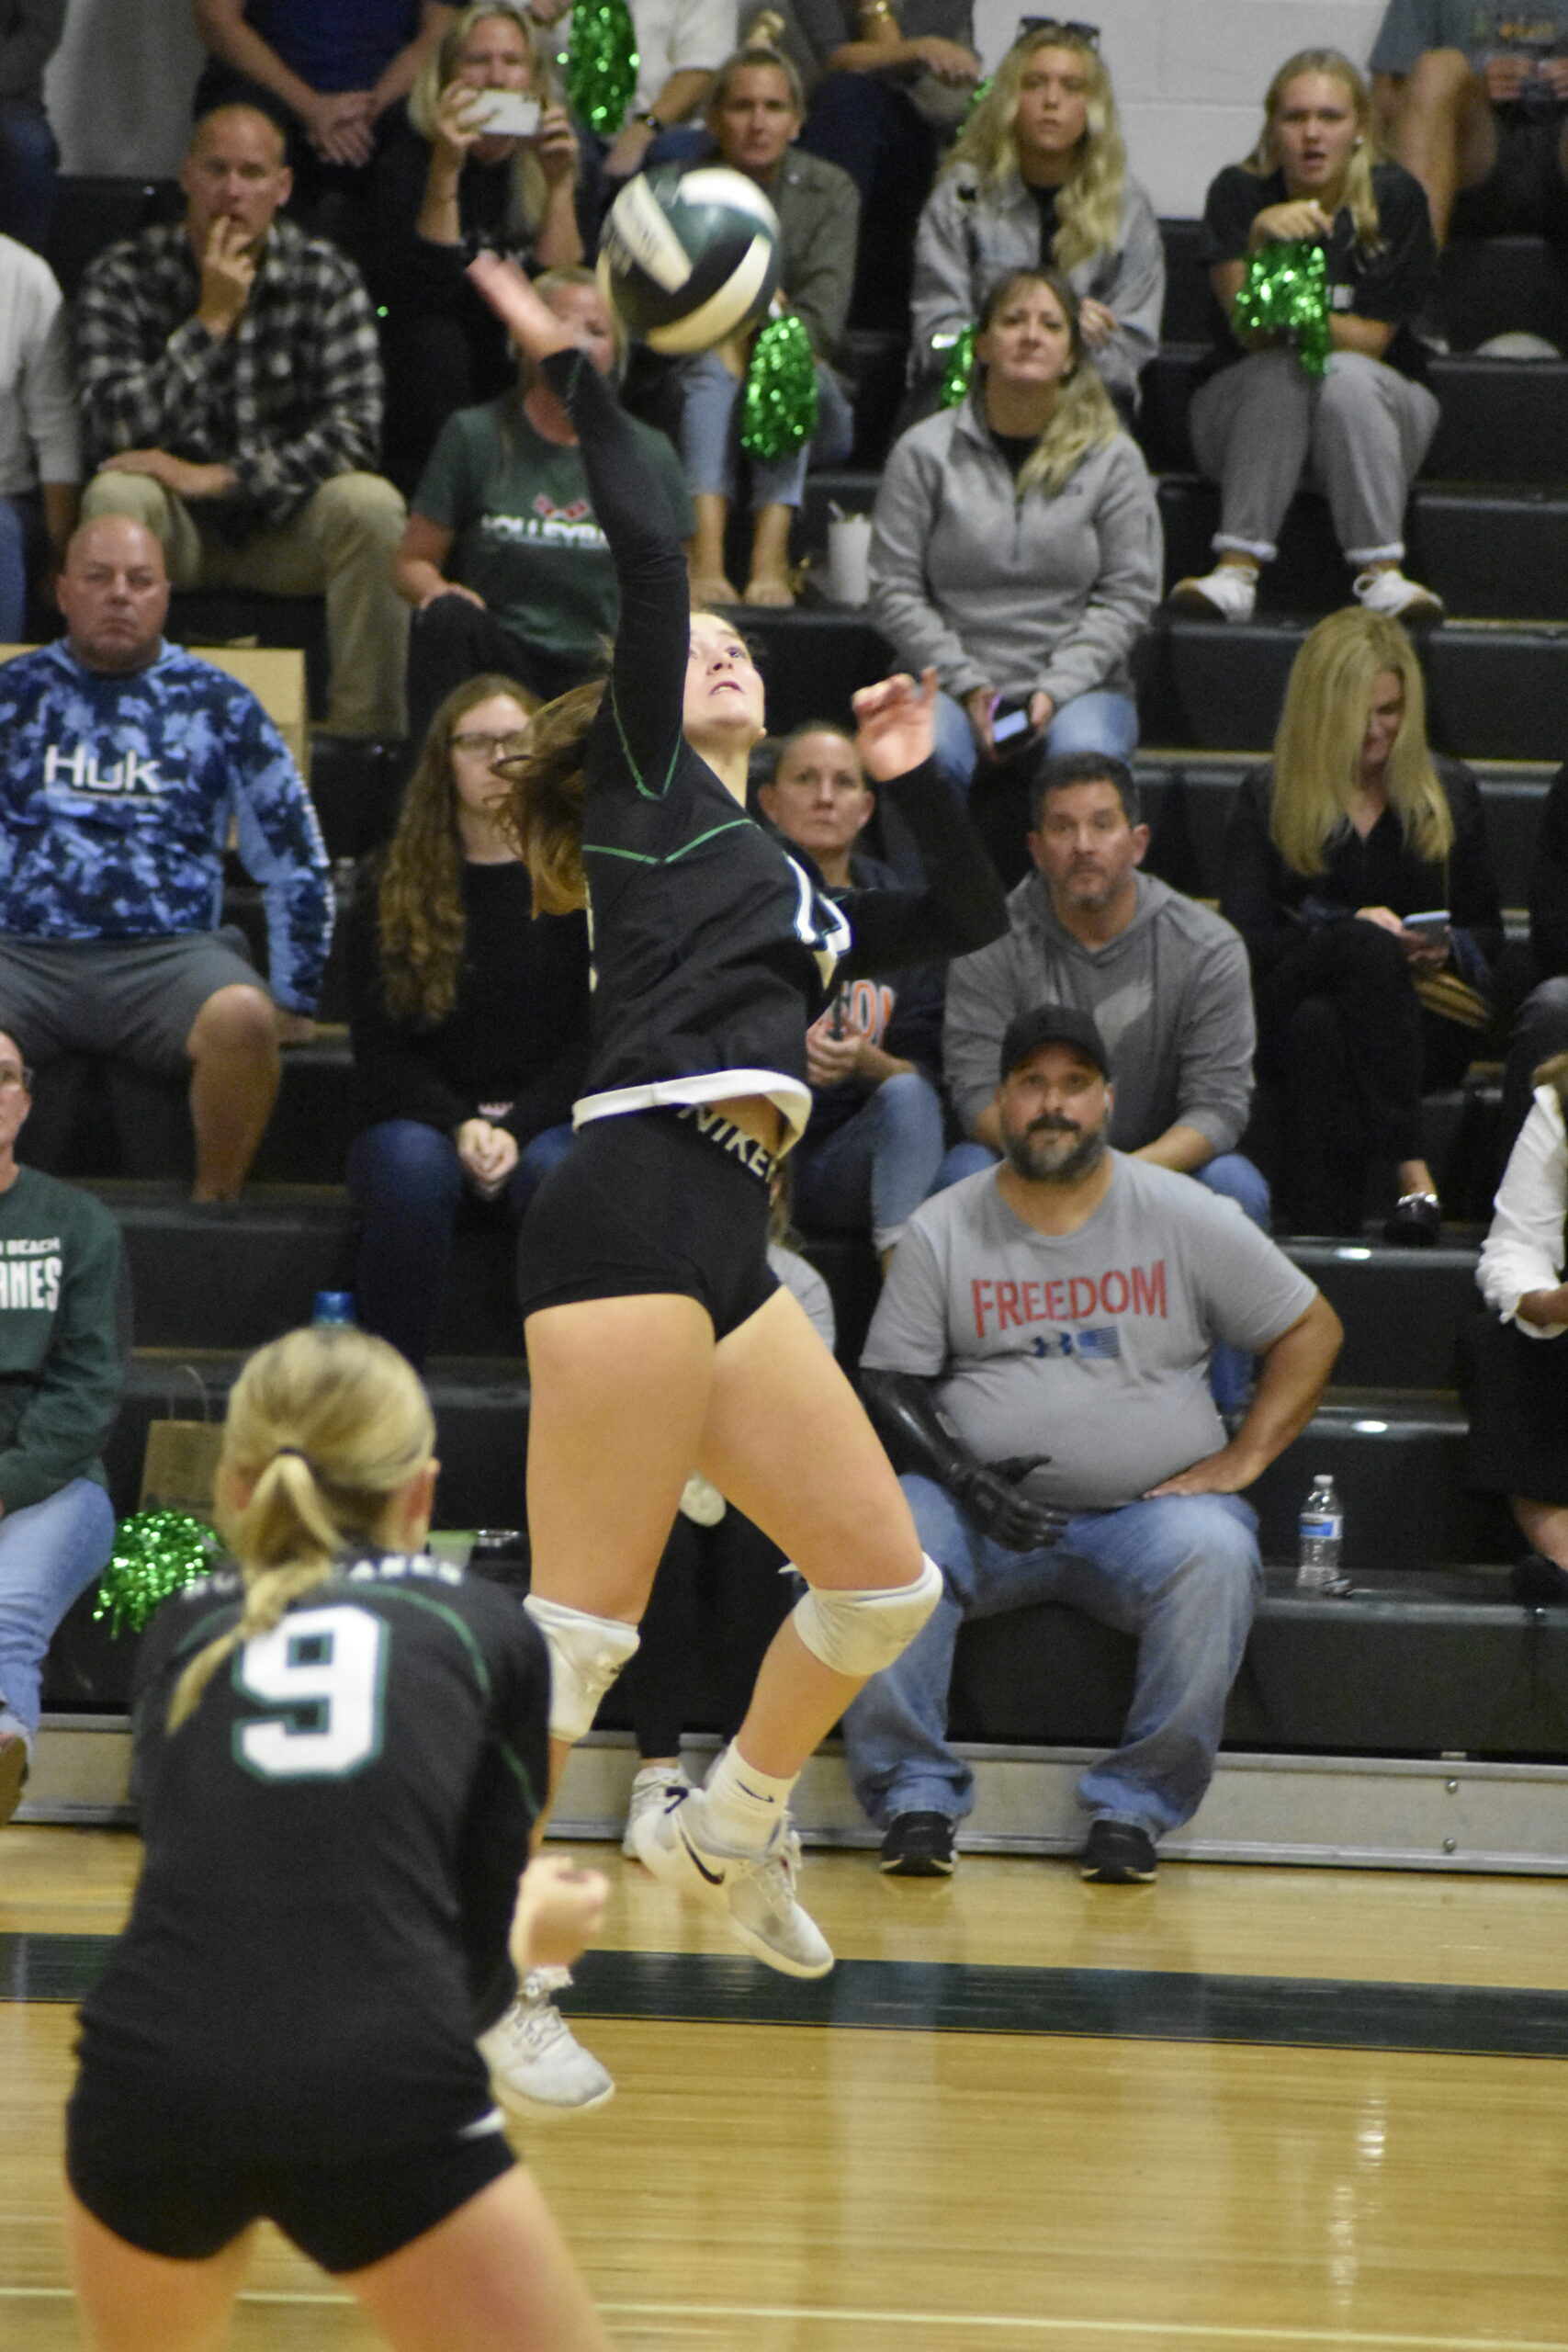 Haley Waszkelewicz hits the ball over for the Hurricanes.    DREW BUDD